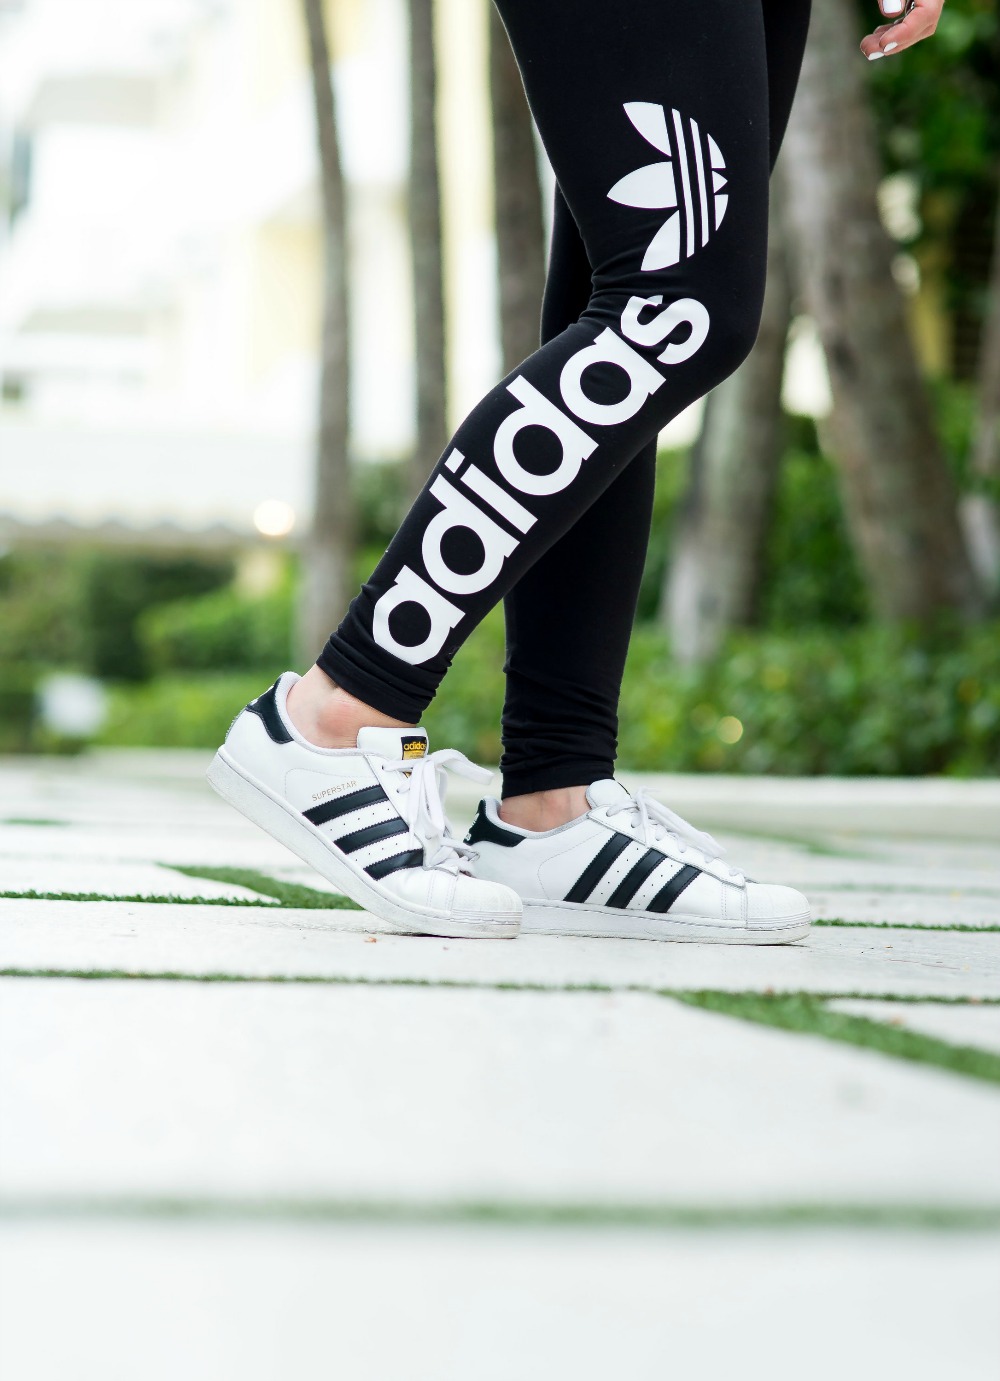 Adidas superstars and leggings for casual style // the modern savvy